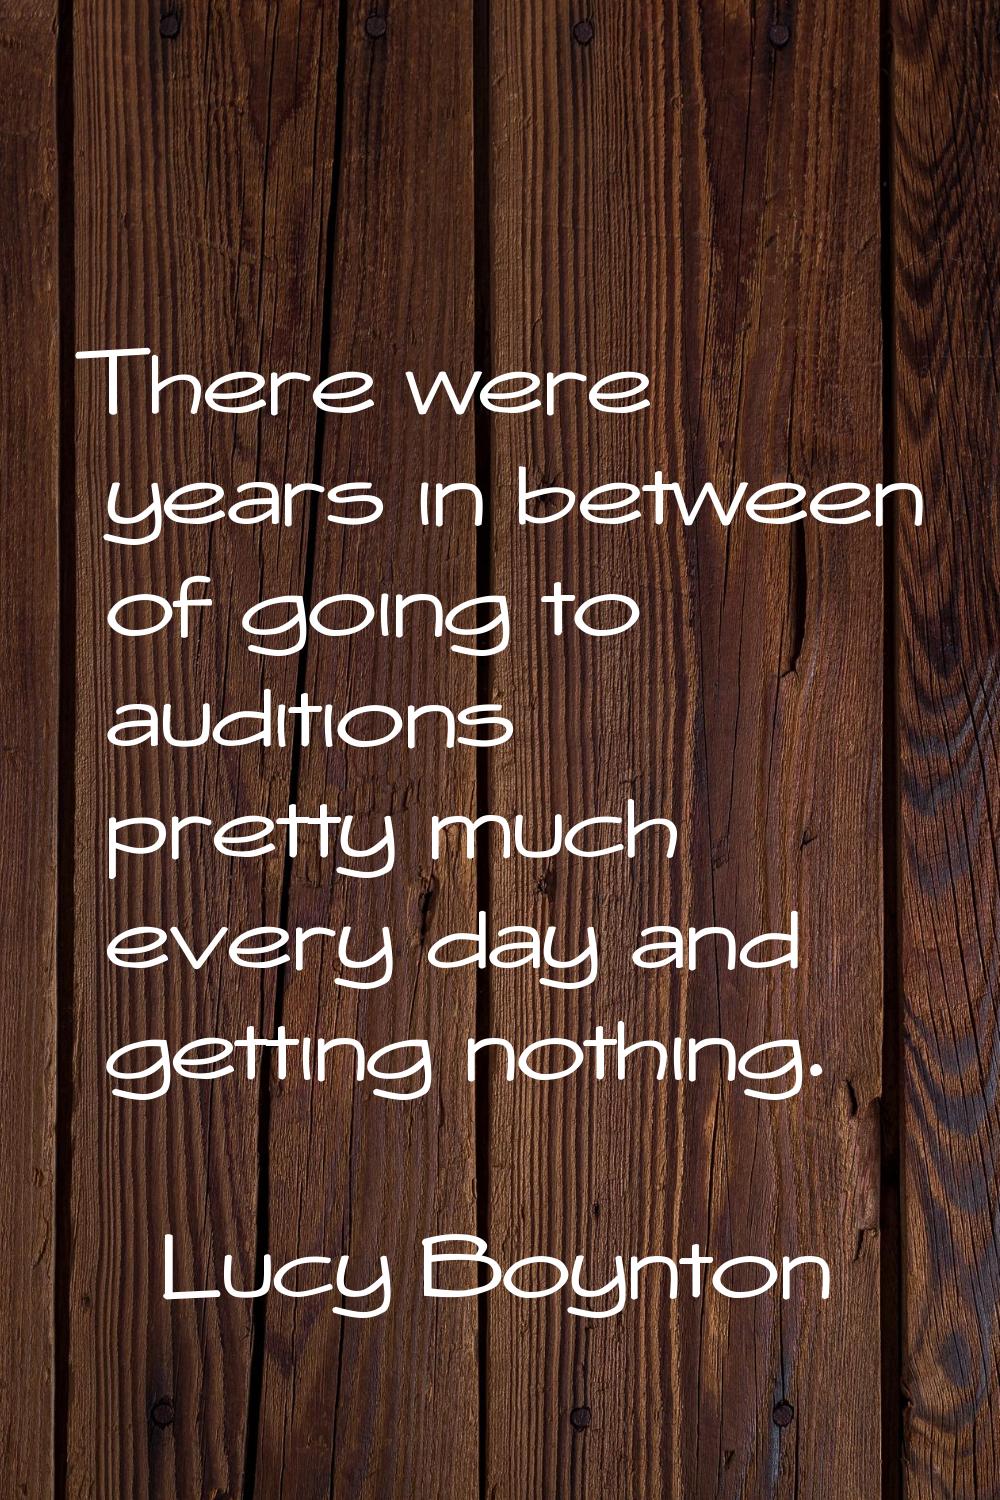 There were years in between of going to auditions pretty much every day and getting nothing.